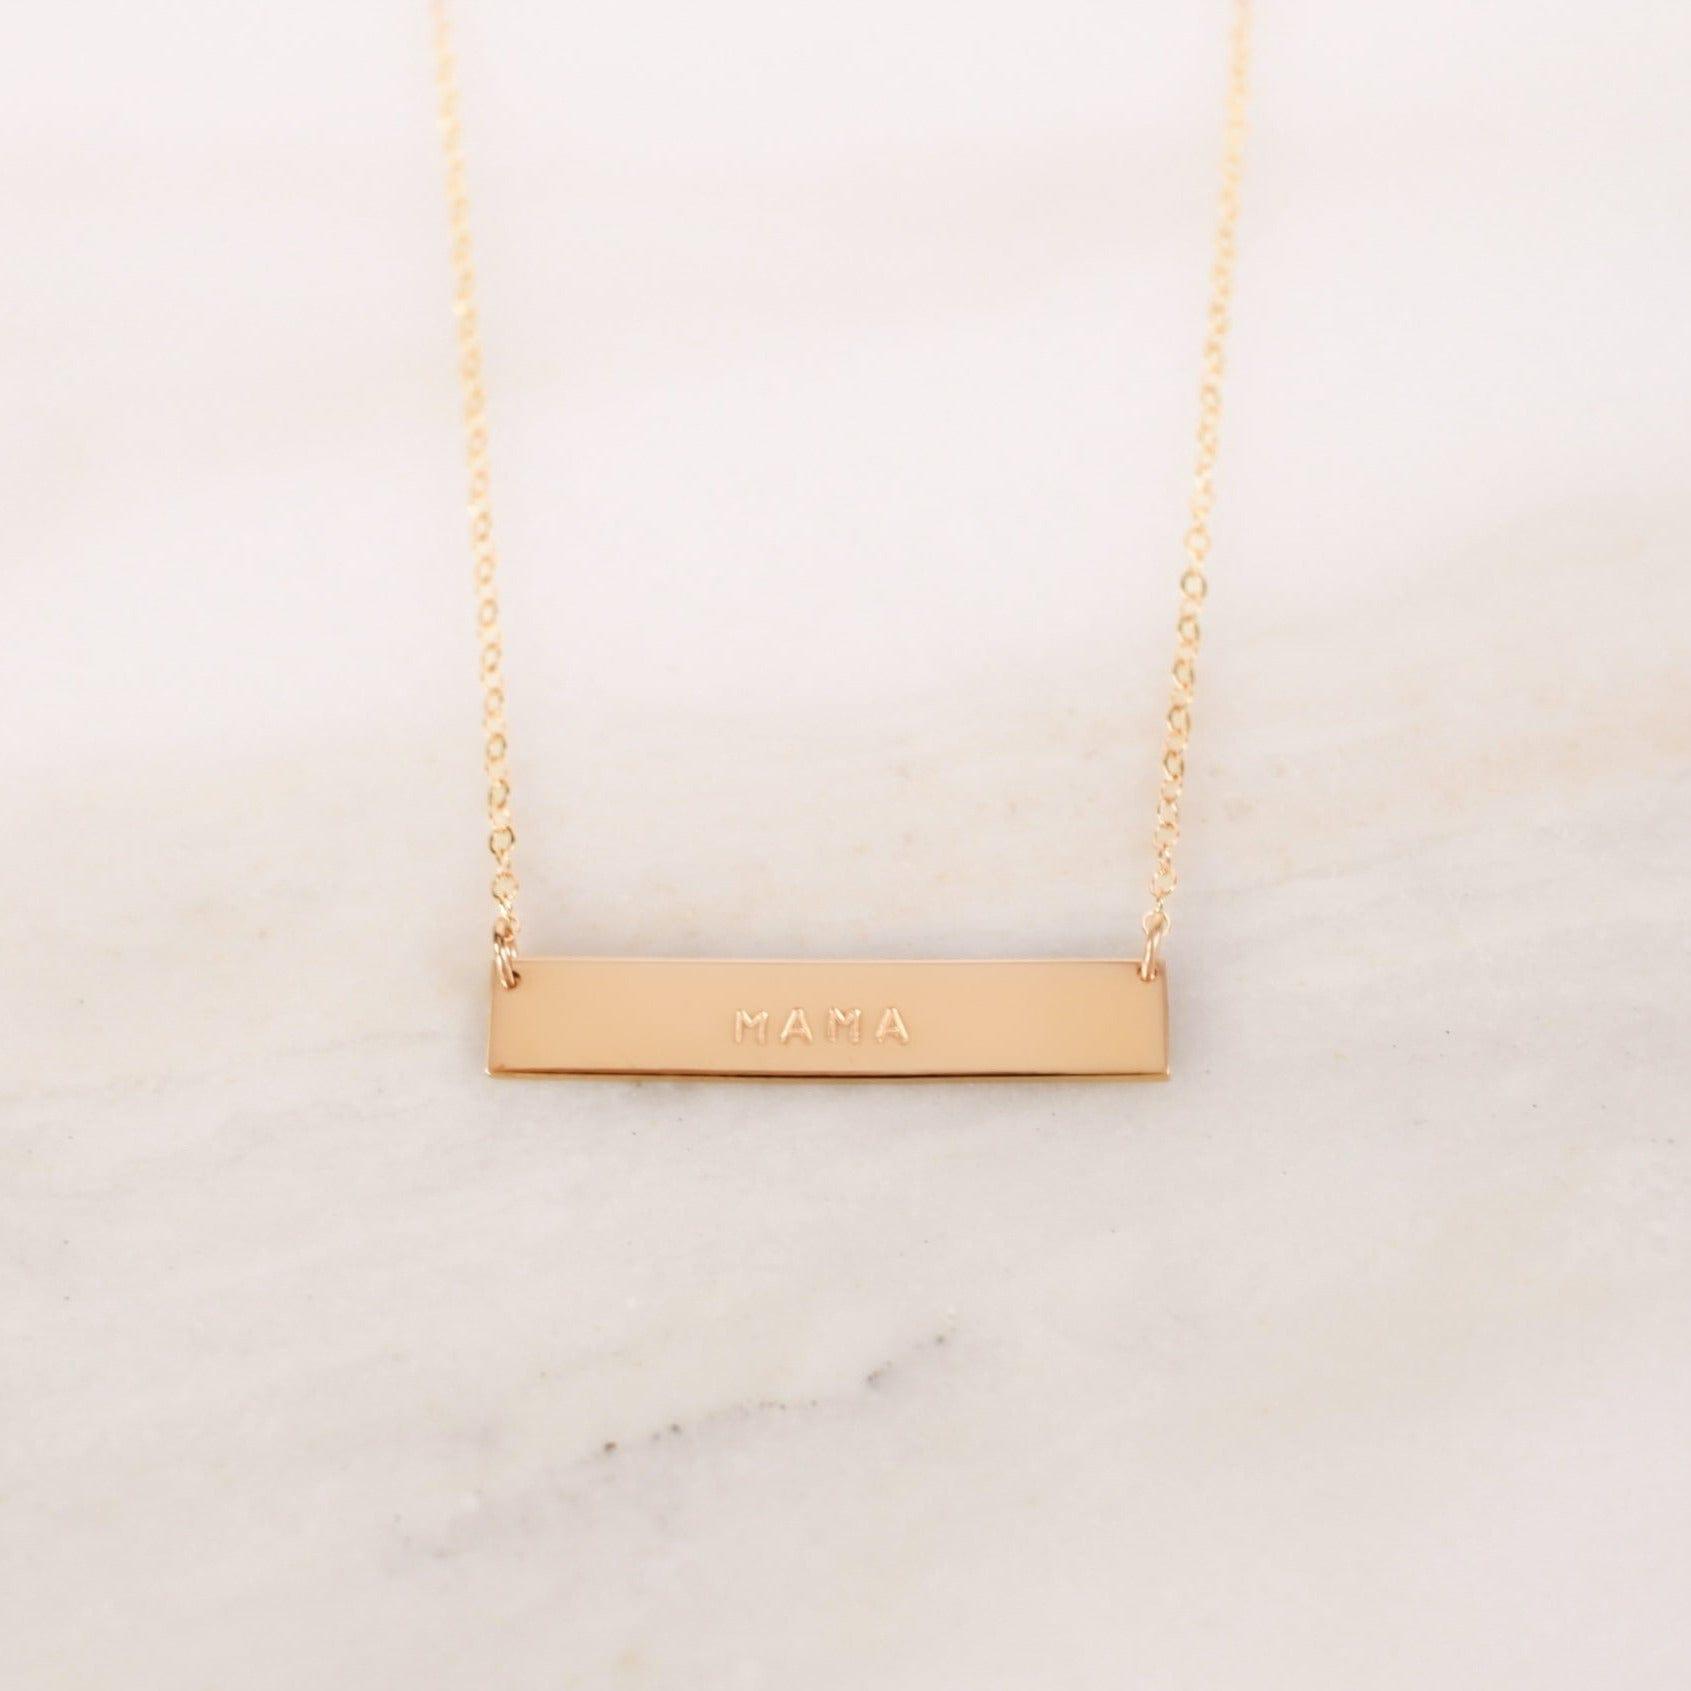 Mama Bar Necklace - Nolia Jewelry - Meaningful + Sustainably Handcrafted Jewelry